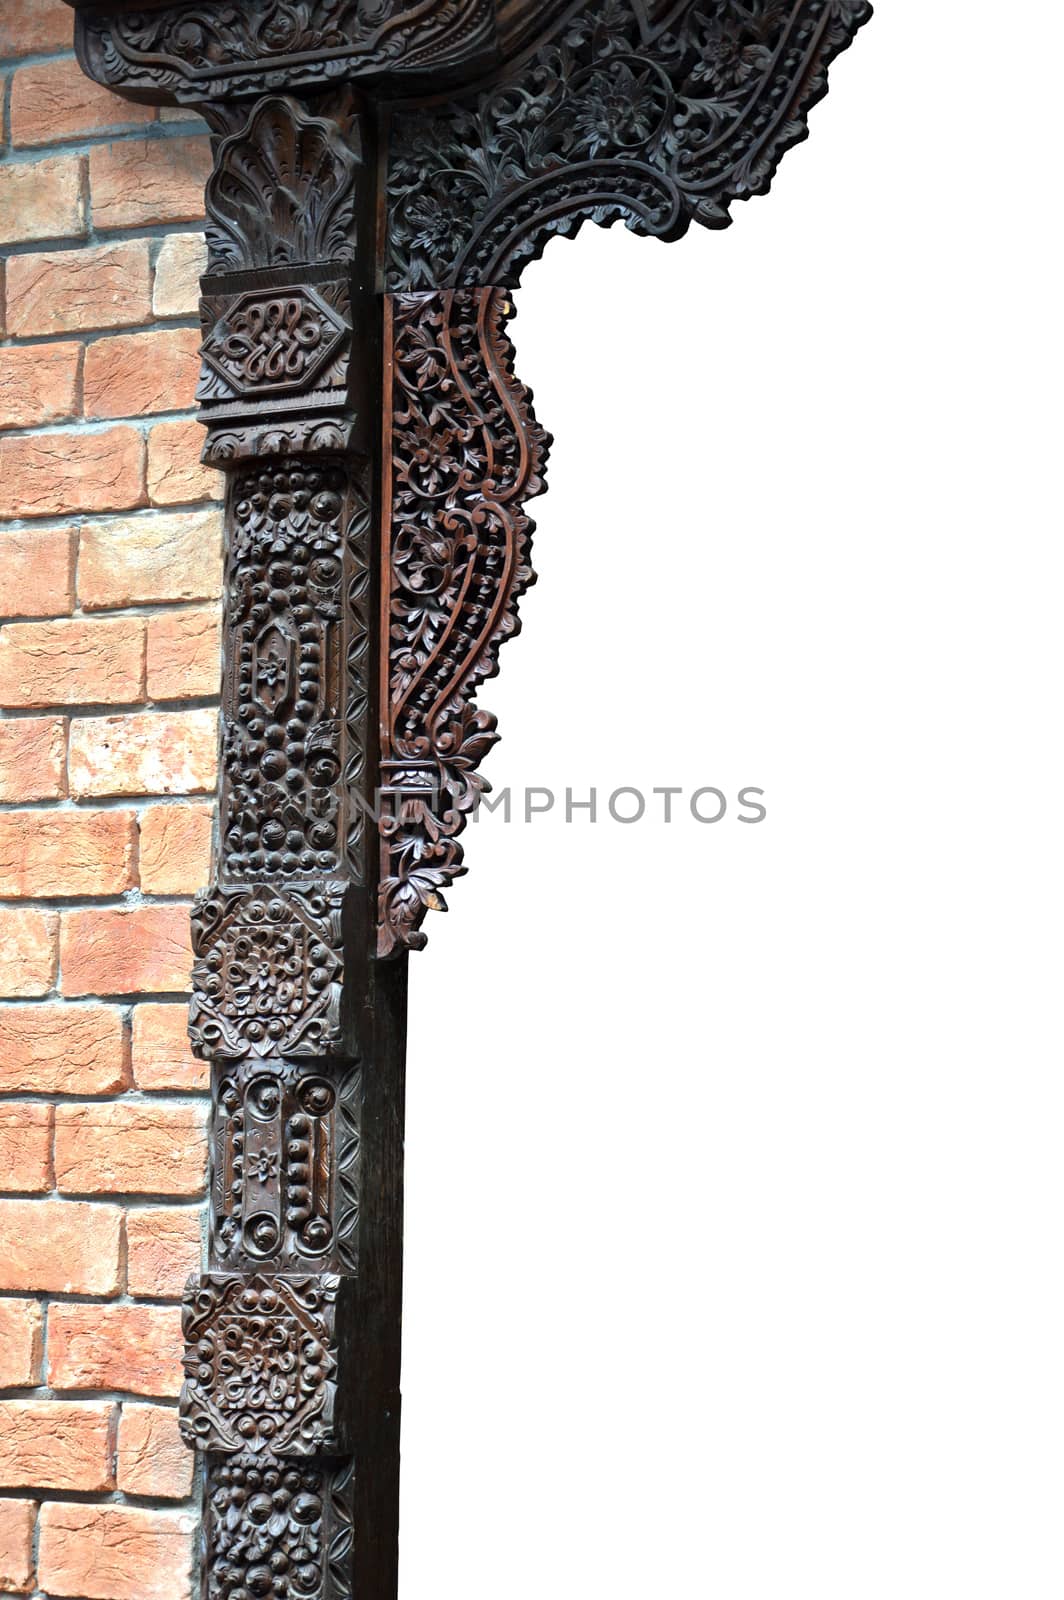 traditional Jepara carving ornaments on the wood